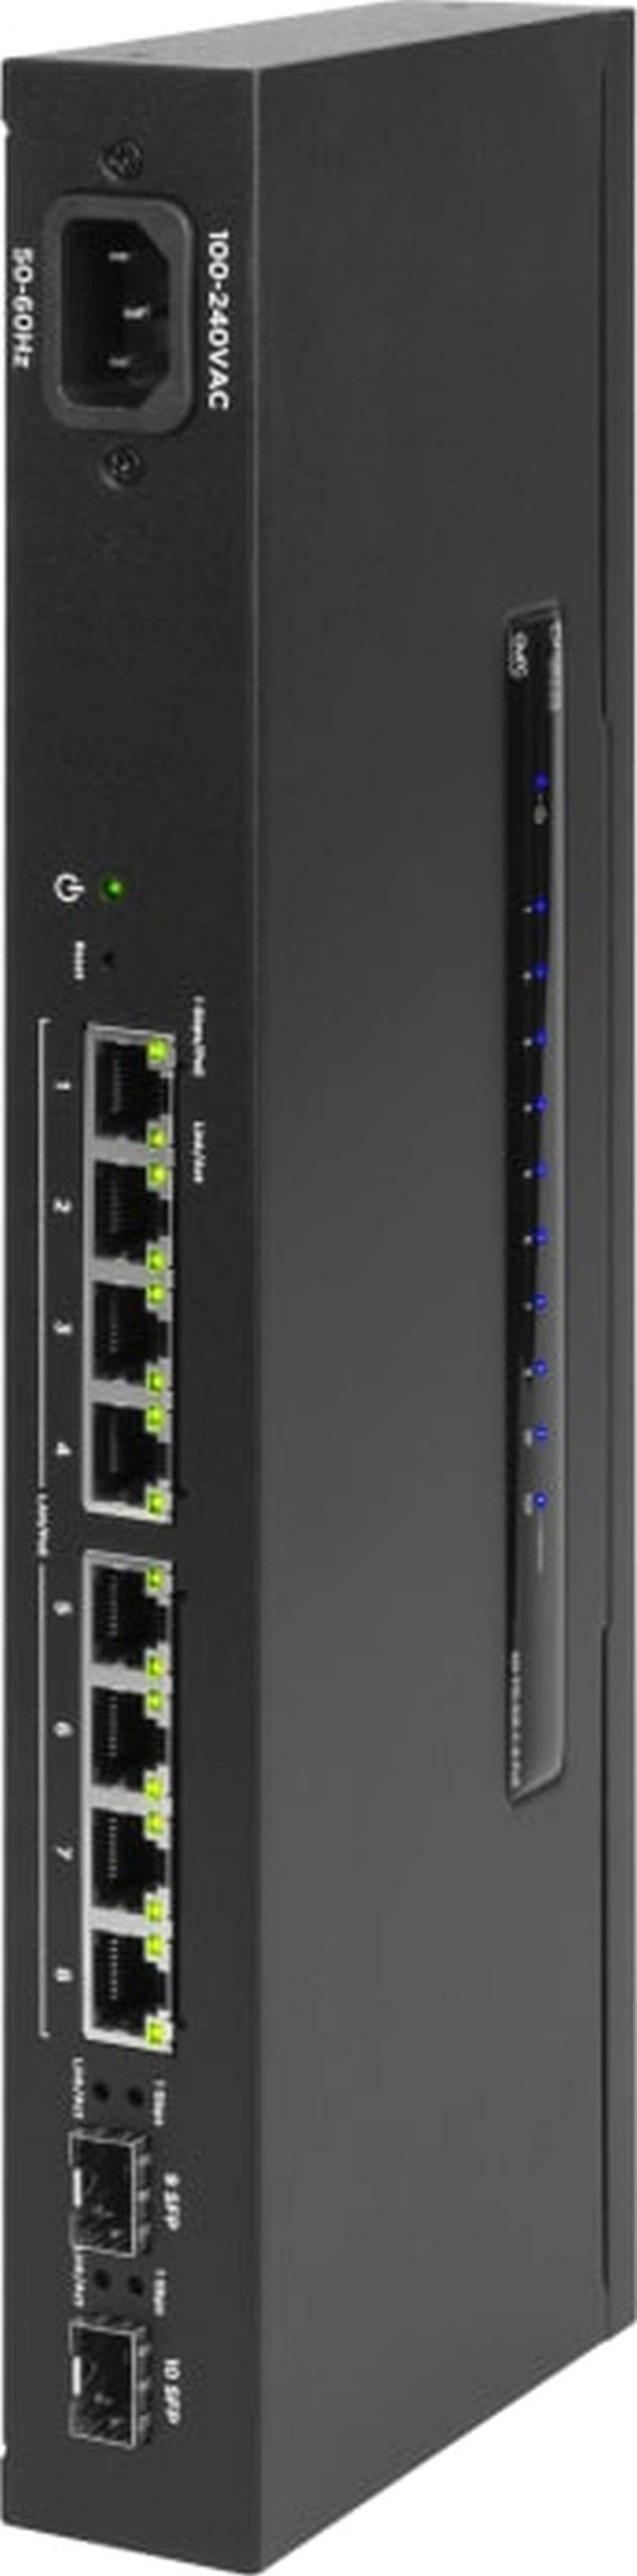 SnapAV Araknis Networks® 210 Series Black 8 Ports Websmart Gigabit Switch with Compact Design and Partial PoE+ 4